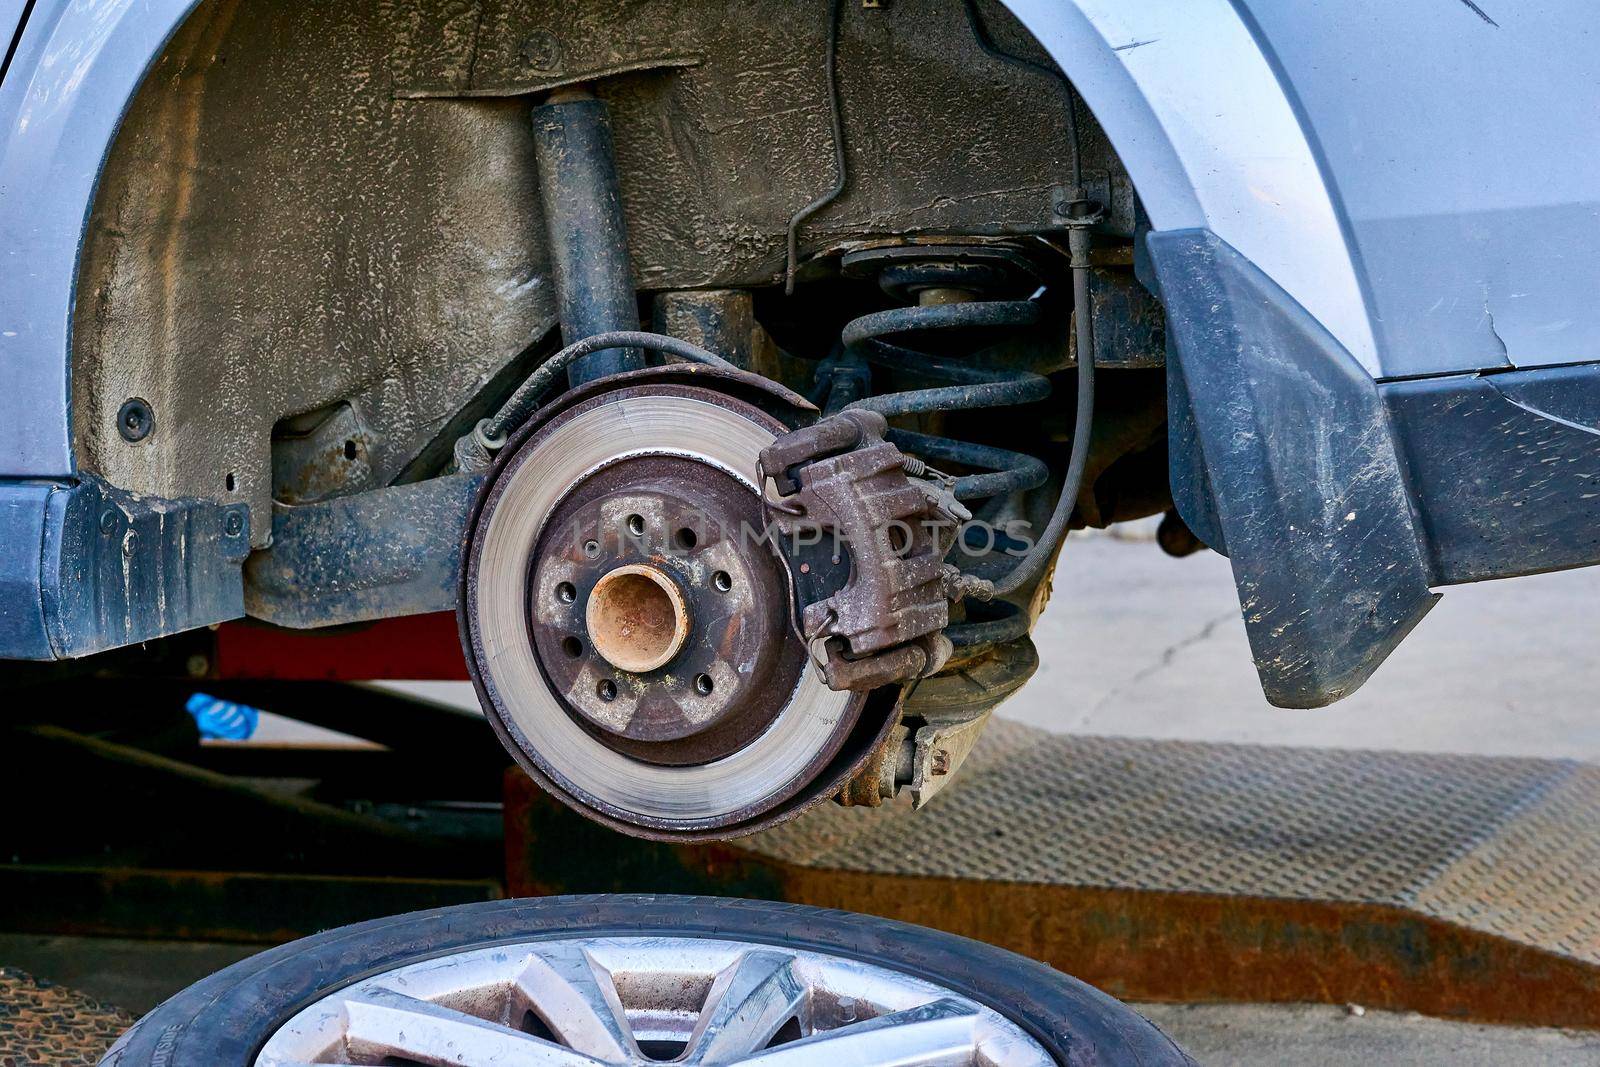 Replacing a car wheel at a tire station. a rubber covering, typically inflated or surrounding an inflated inner tube, placed around a wheel to form a flexible contact with the road.